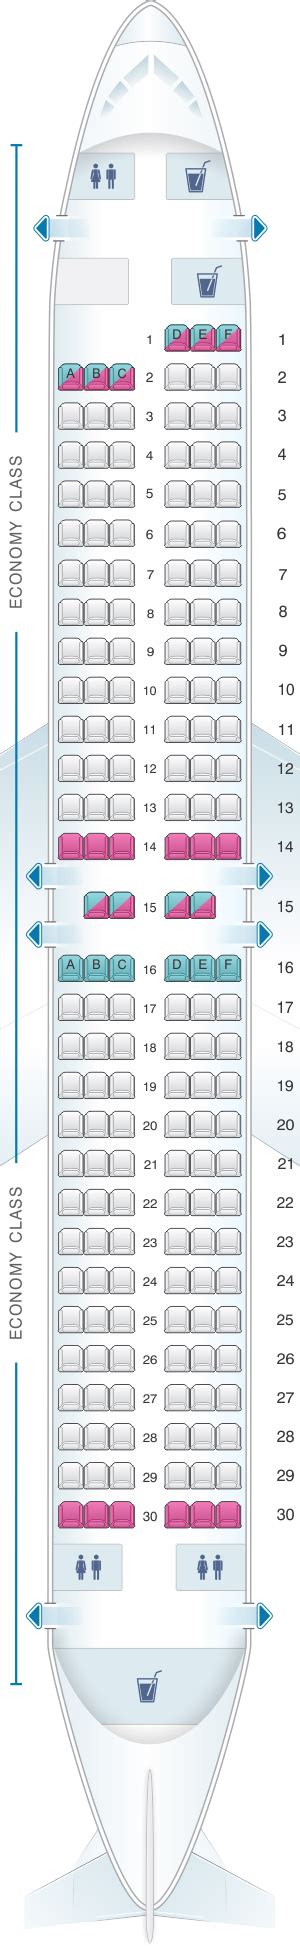 Seat map for southwest airlines. Southwest Airlines' unallocated seat assignments, or "open seating," have been a part of the airline since its beginnings. The unique seating model not only aligns with Southwest's egalitarian ticketing model but also improves boarding times. Southwest monetizes its boarding groups by offering passengers the option to purchase upgraded boarding ... 